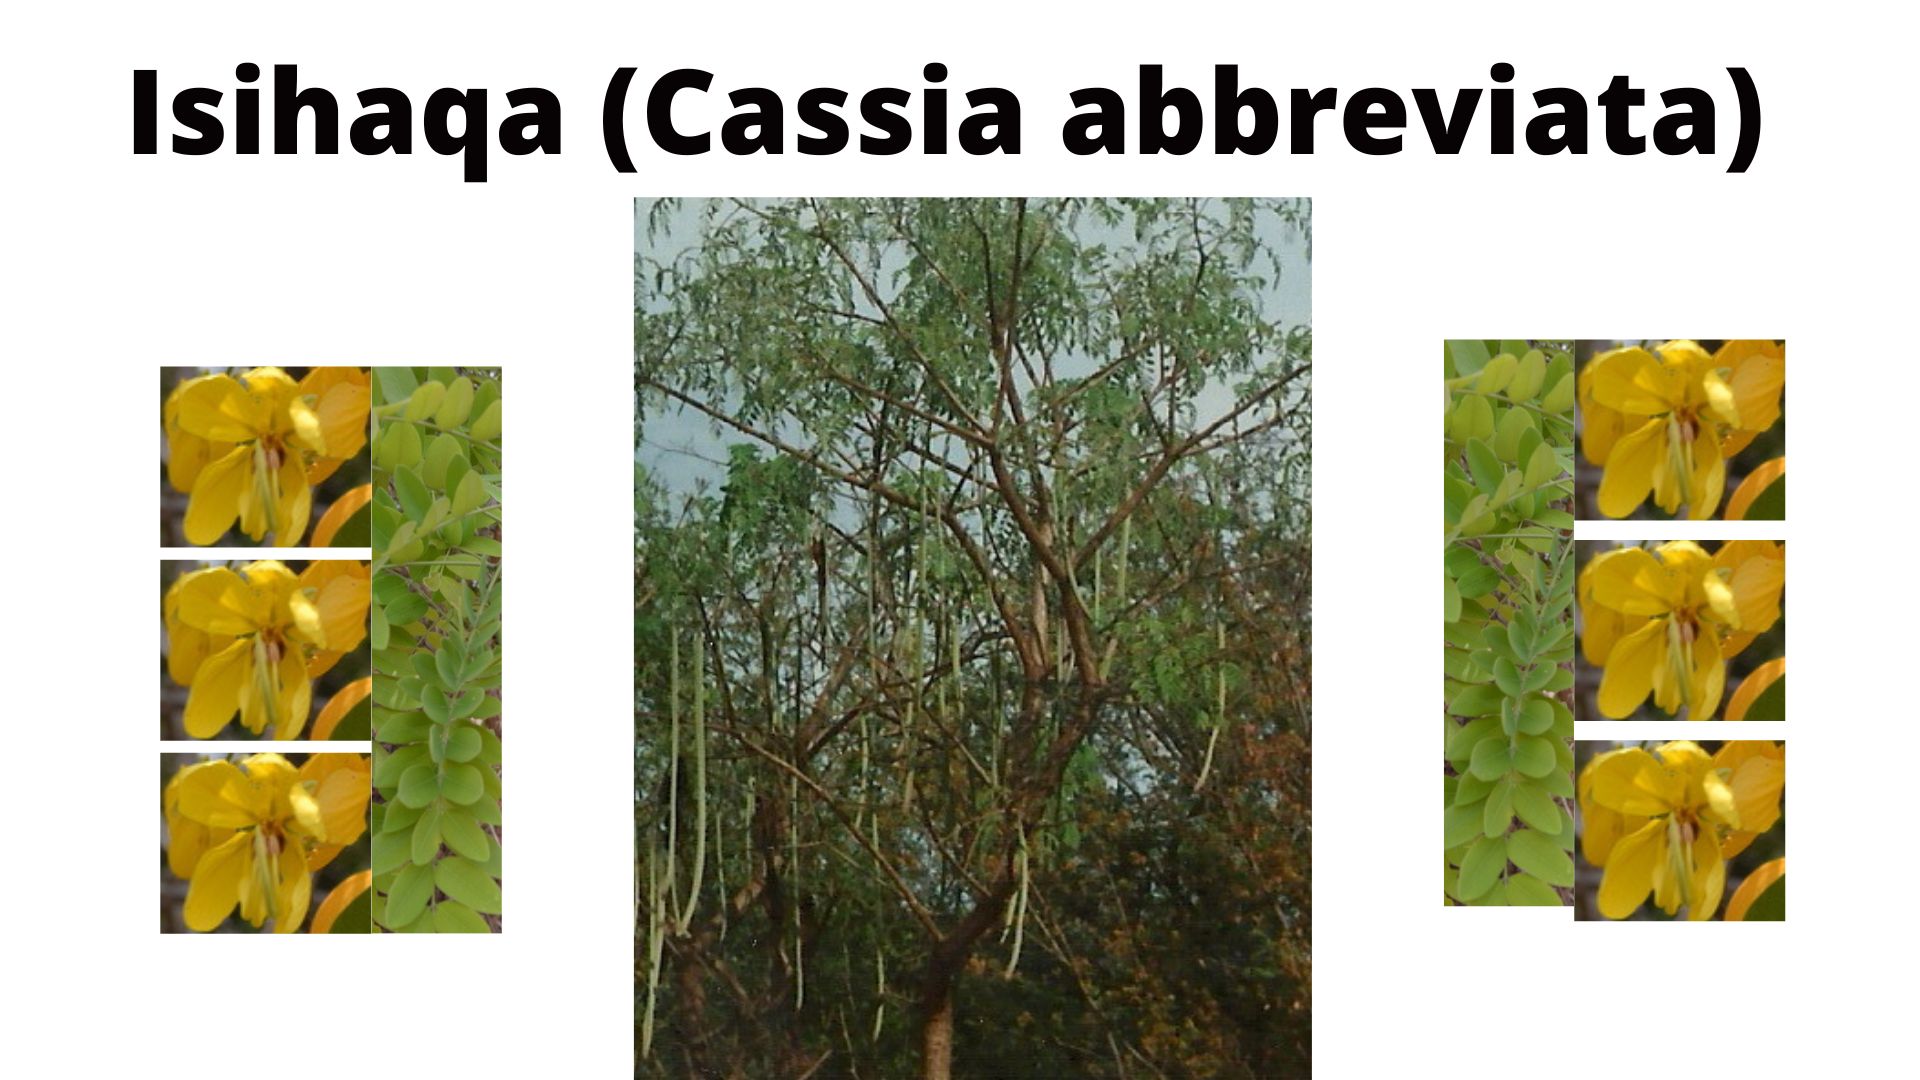 You are currently viewing Cassia abbreviata (Isihaqa)